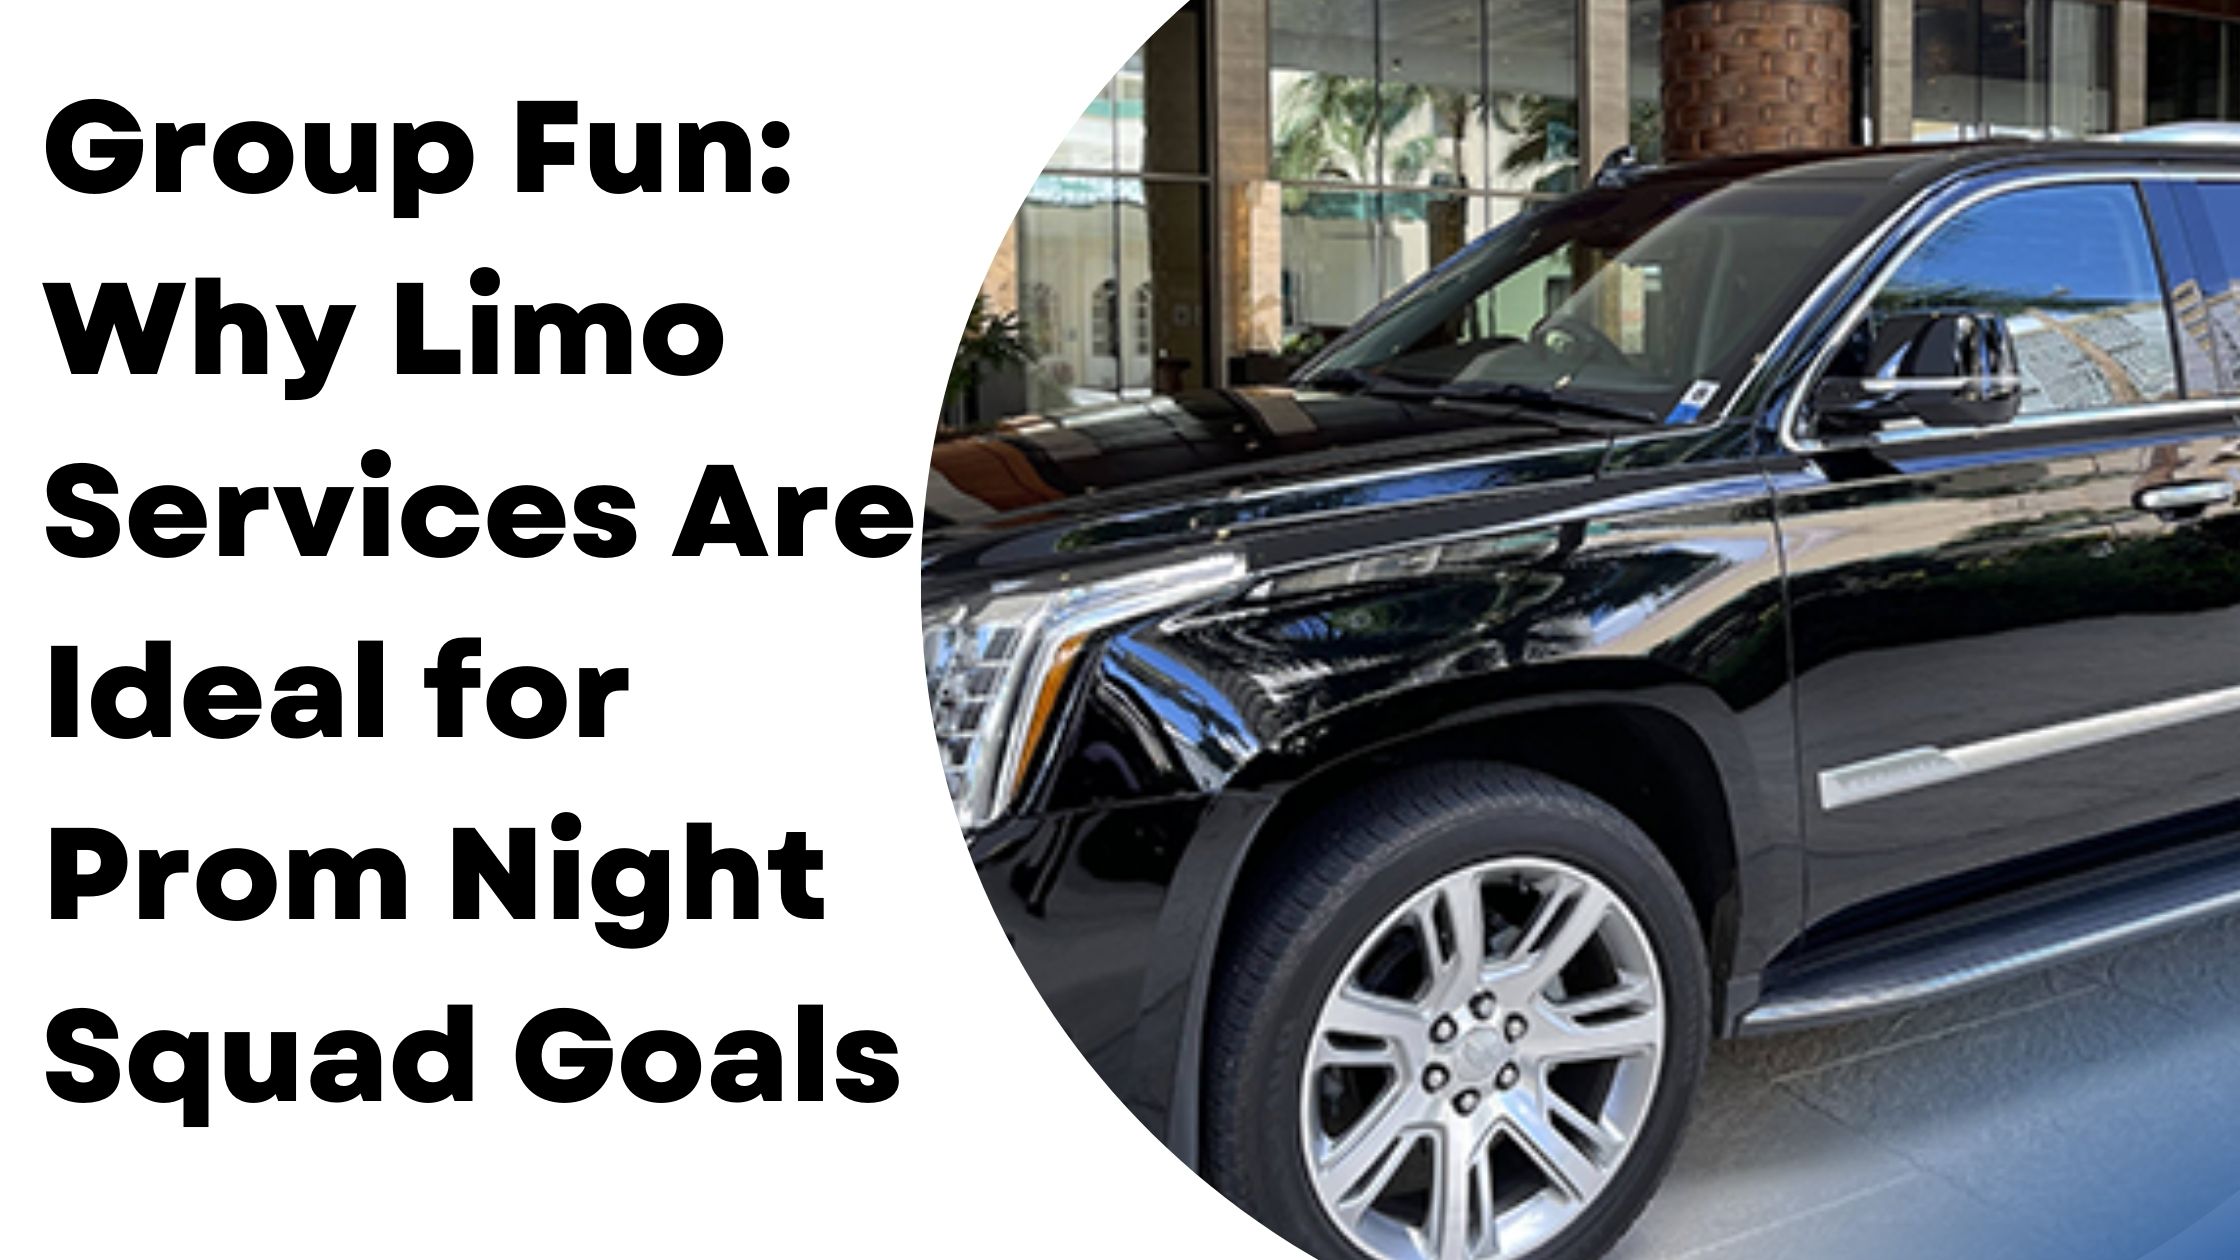 Group Fun Why Limo Services Are Ideal for Prom Night Squad Goals